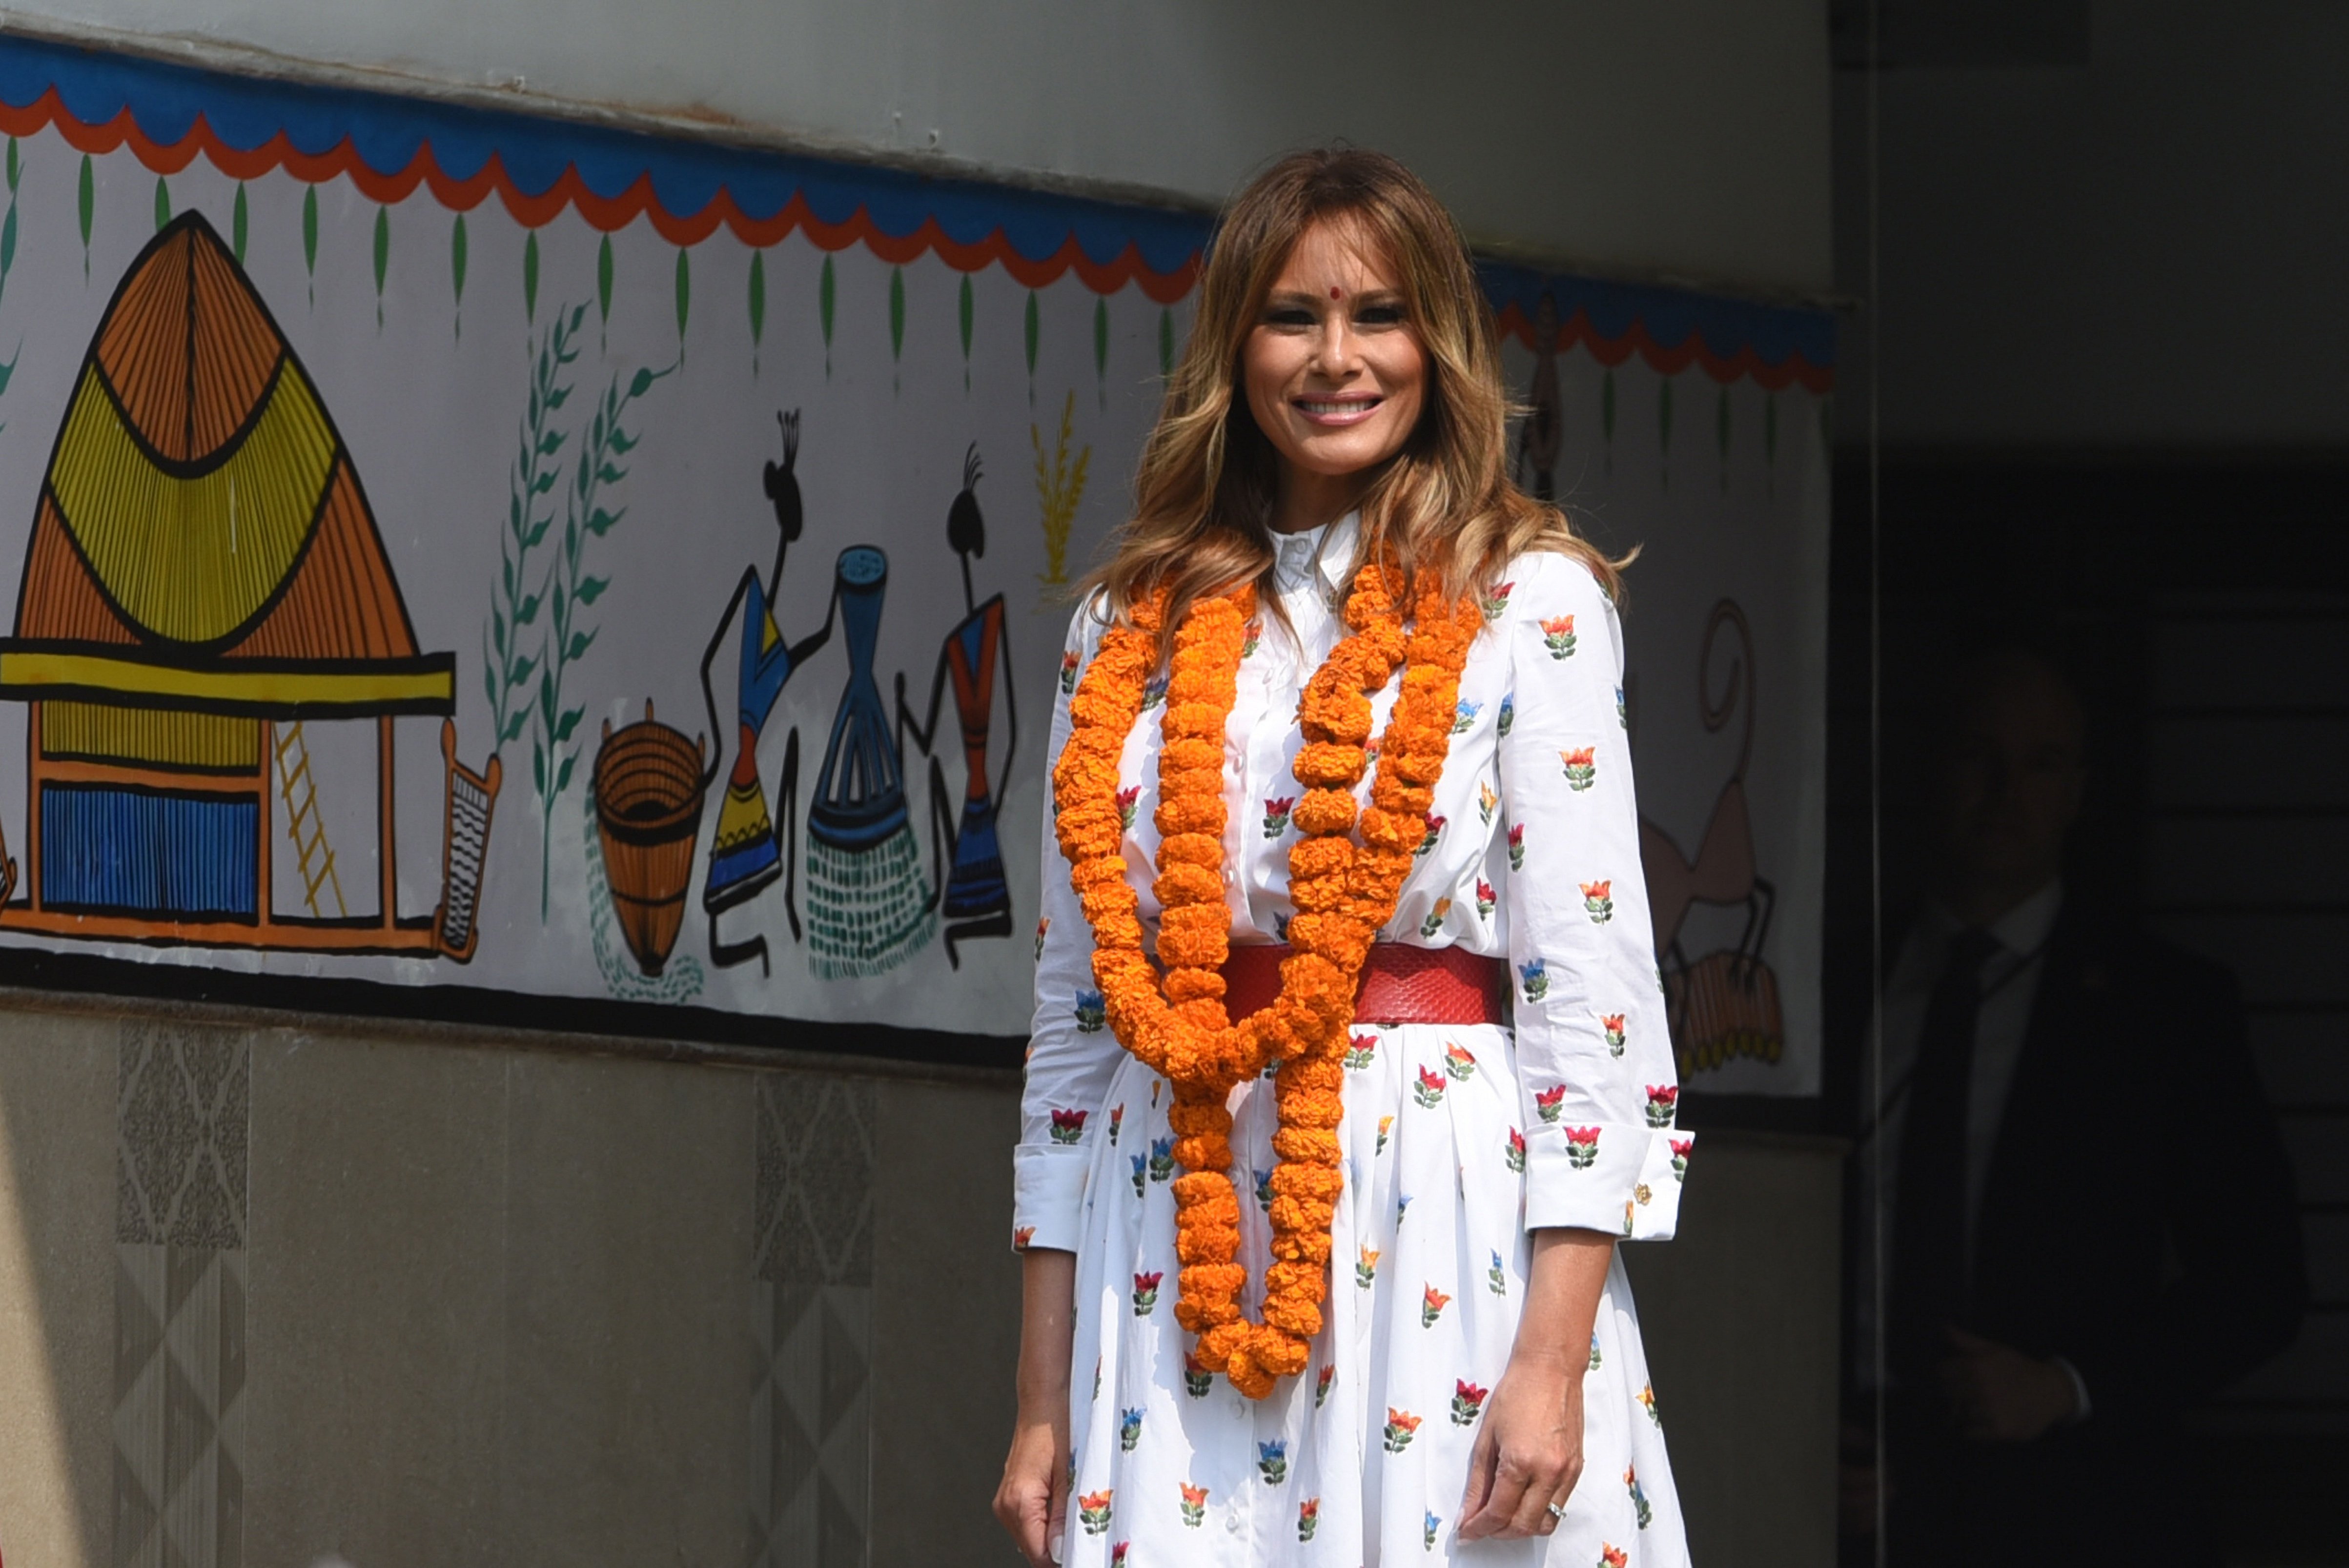 Melania Trump during a visit to a Delhi Government School, at Moti Bagh on February 25, 2020, in New Delhi, India. | Source: Getty Images.